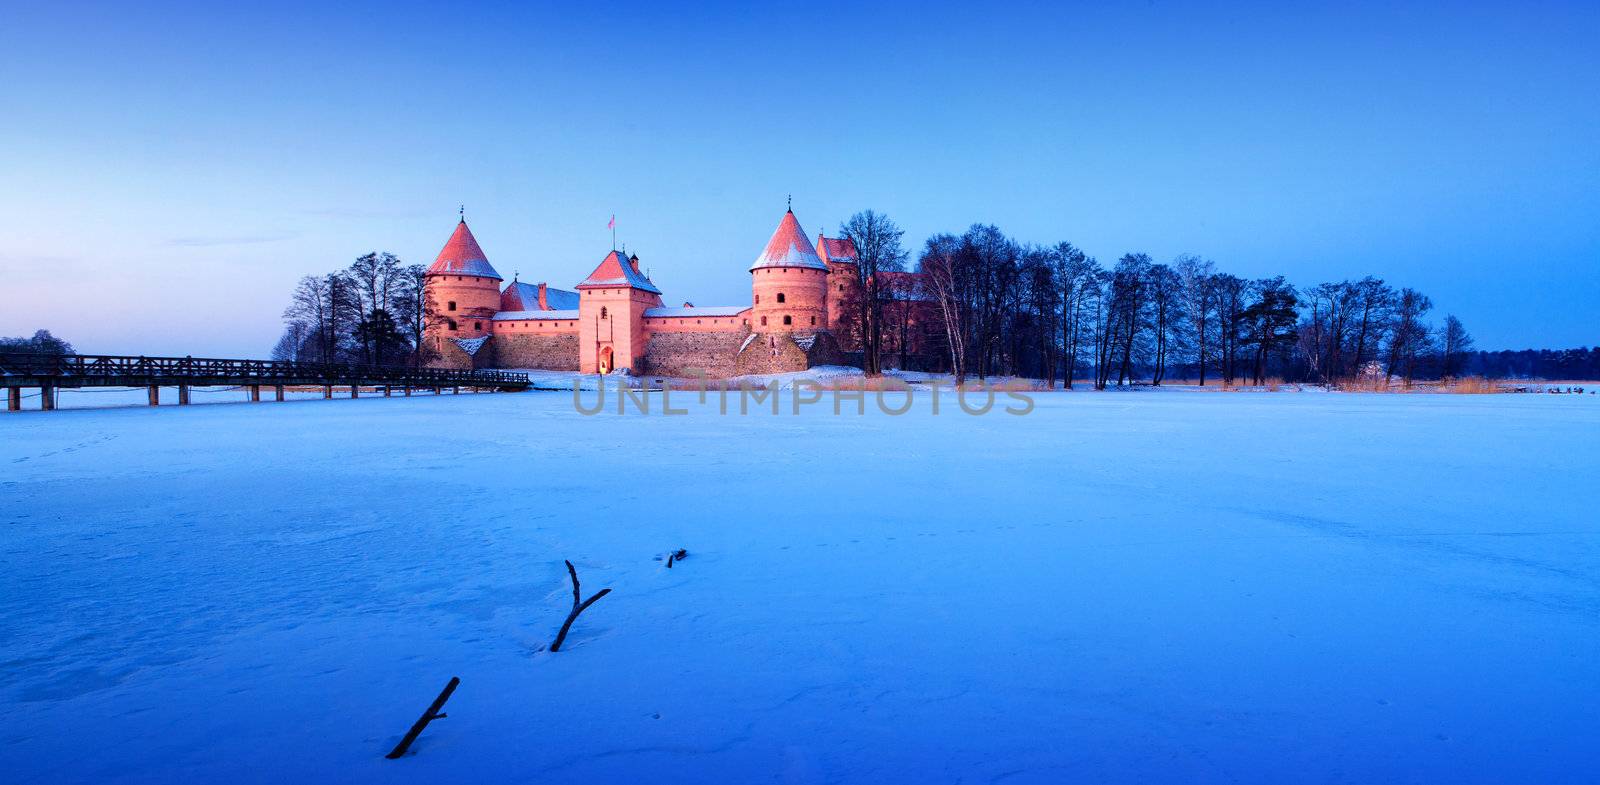 Trakai. Trakai is a historic city and lake resort in Lithuania. It lies 28 km west of Vilnius, the capital of Lithuania.   